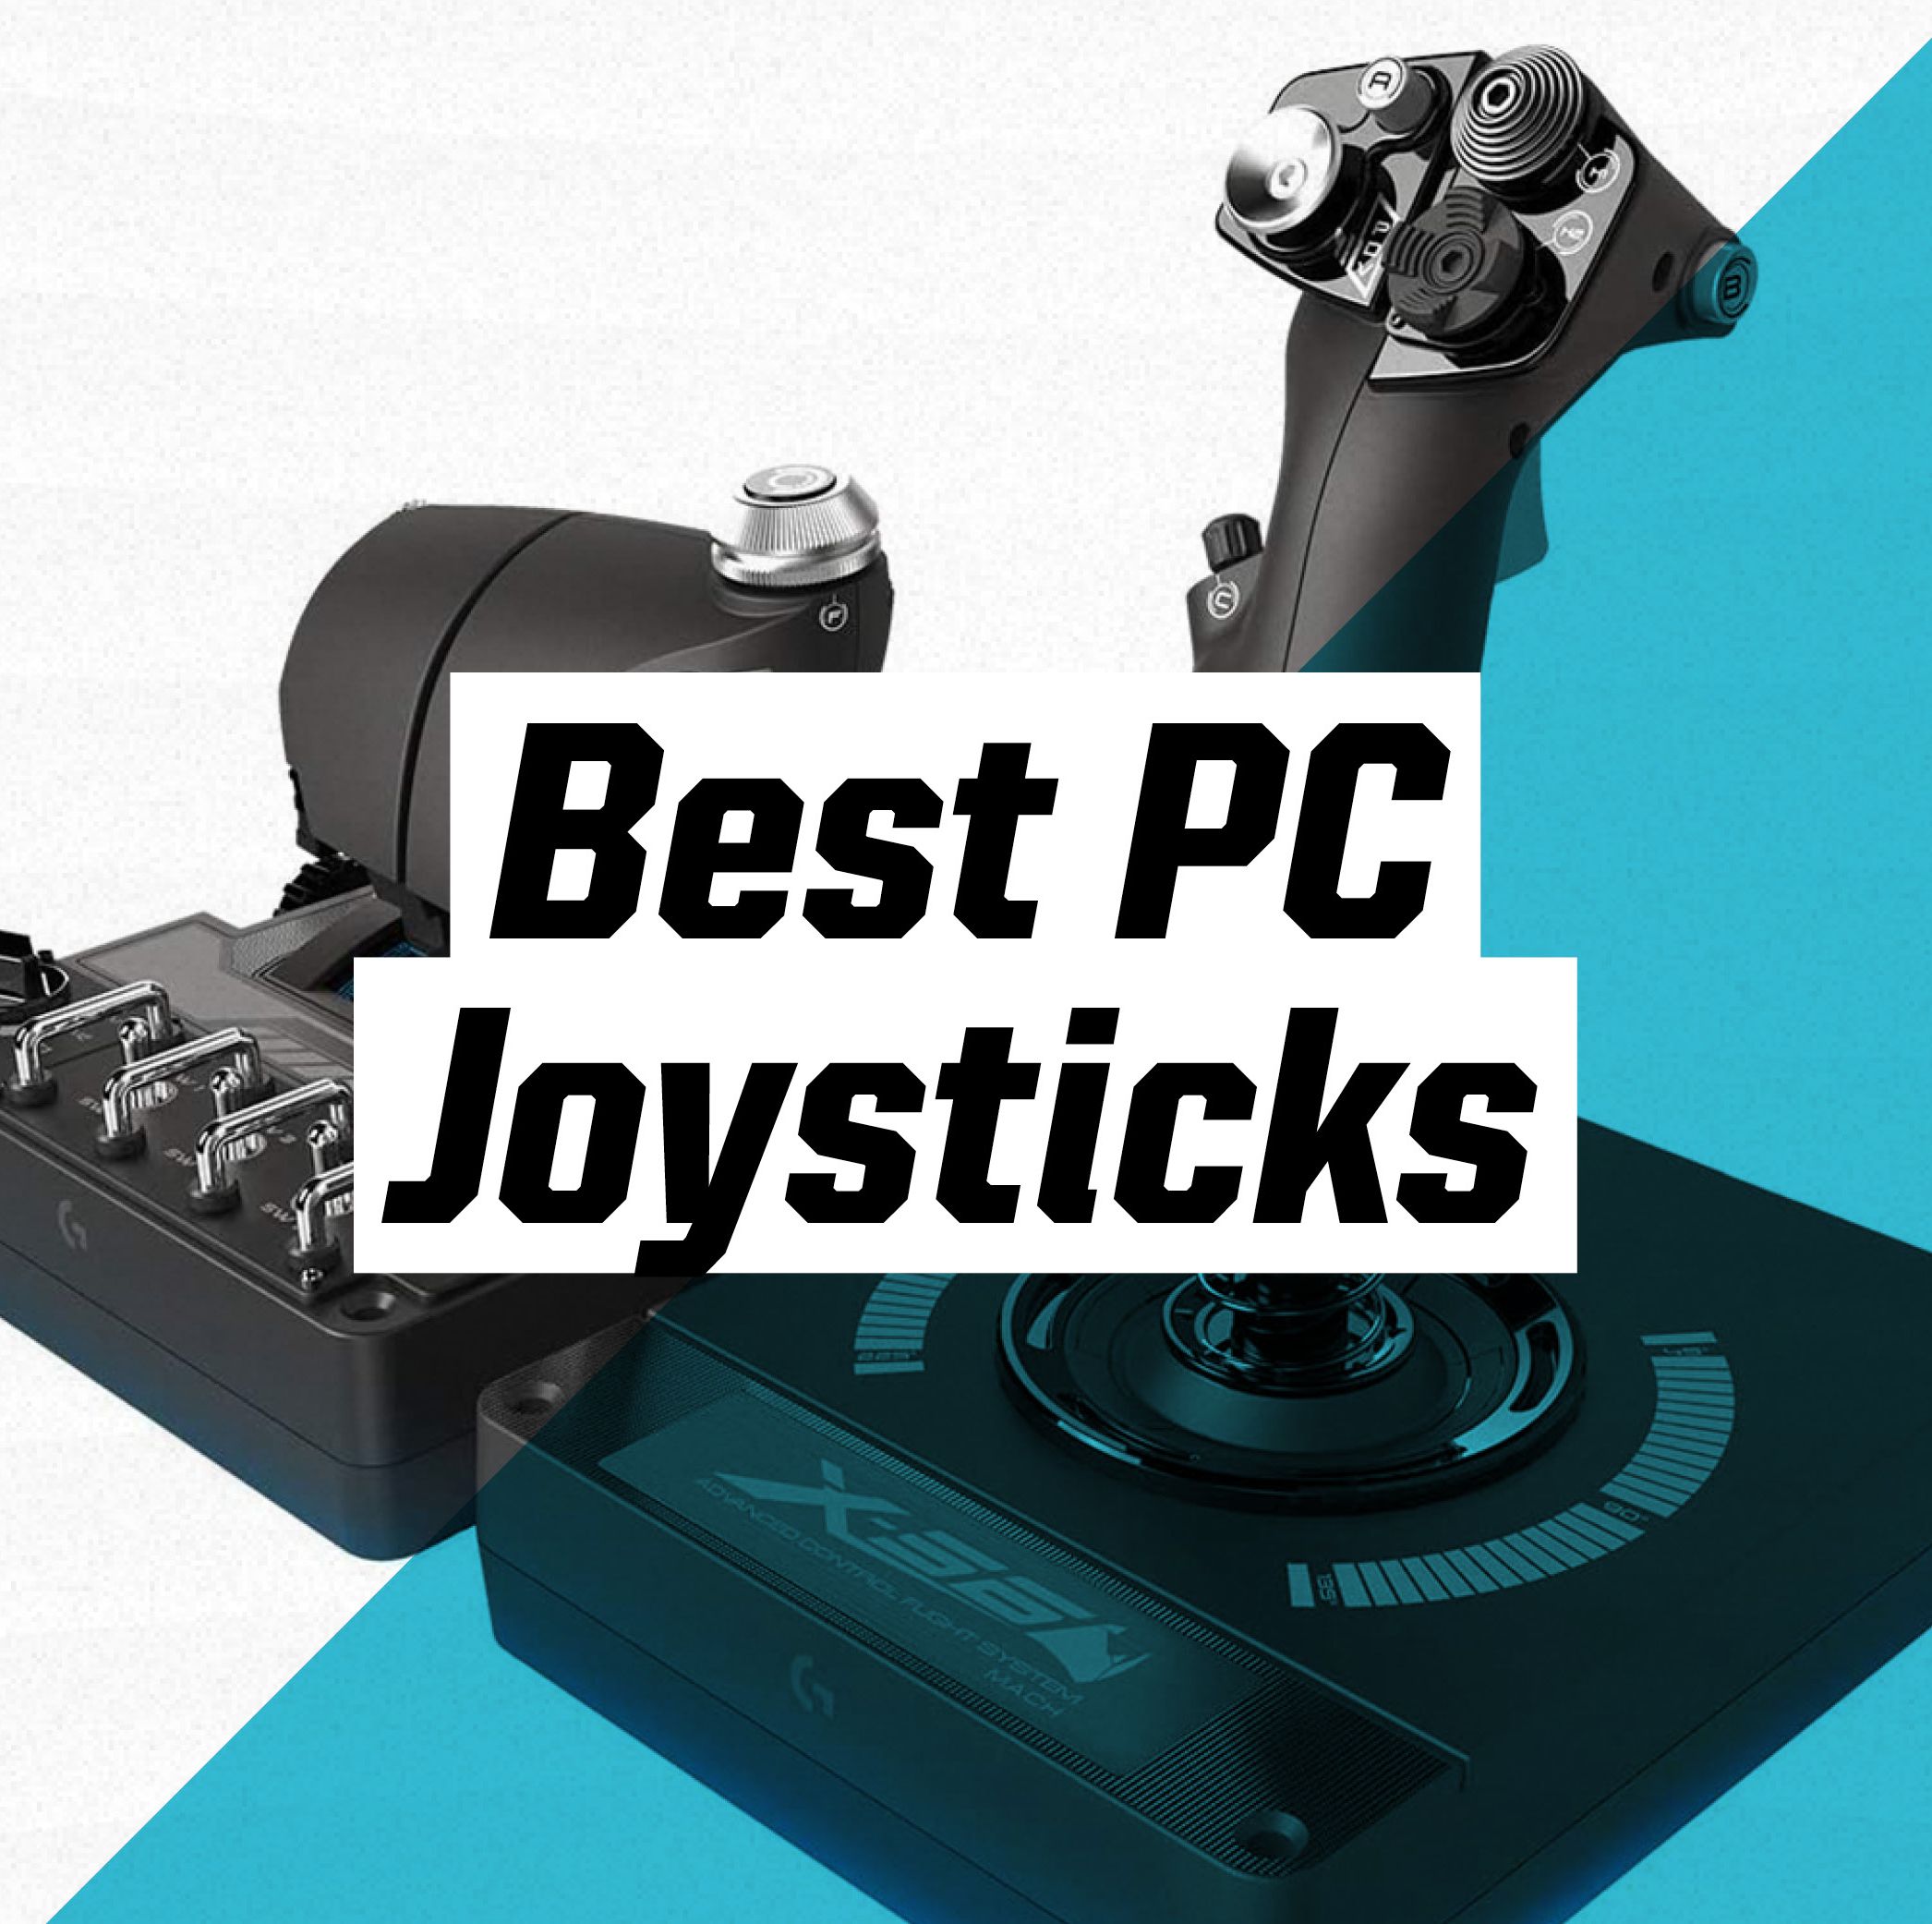 The 5 Best PC Joysticks for Flying on Your PC